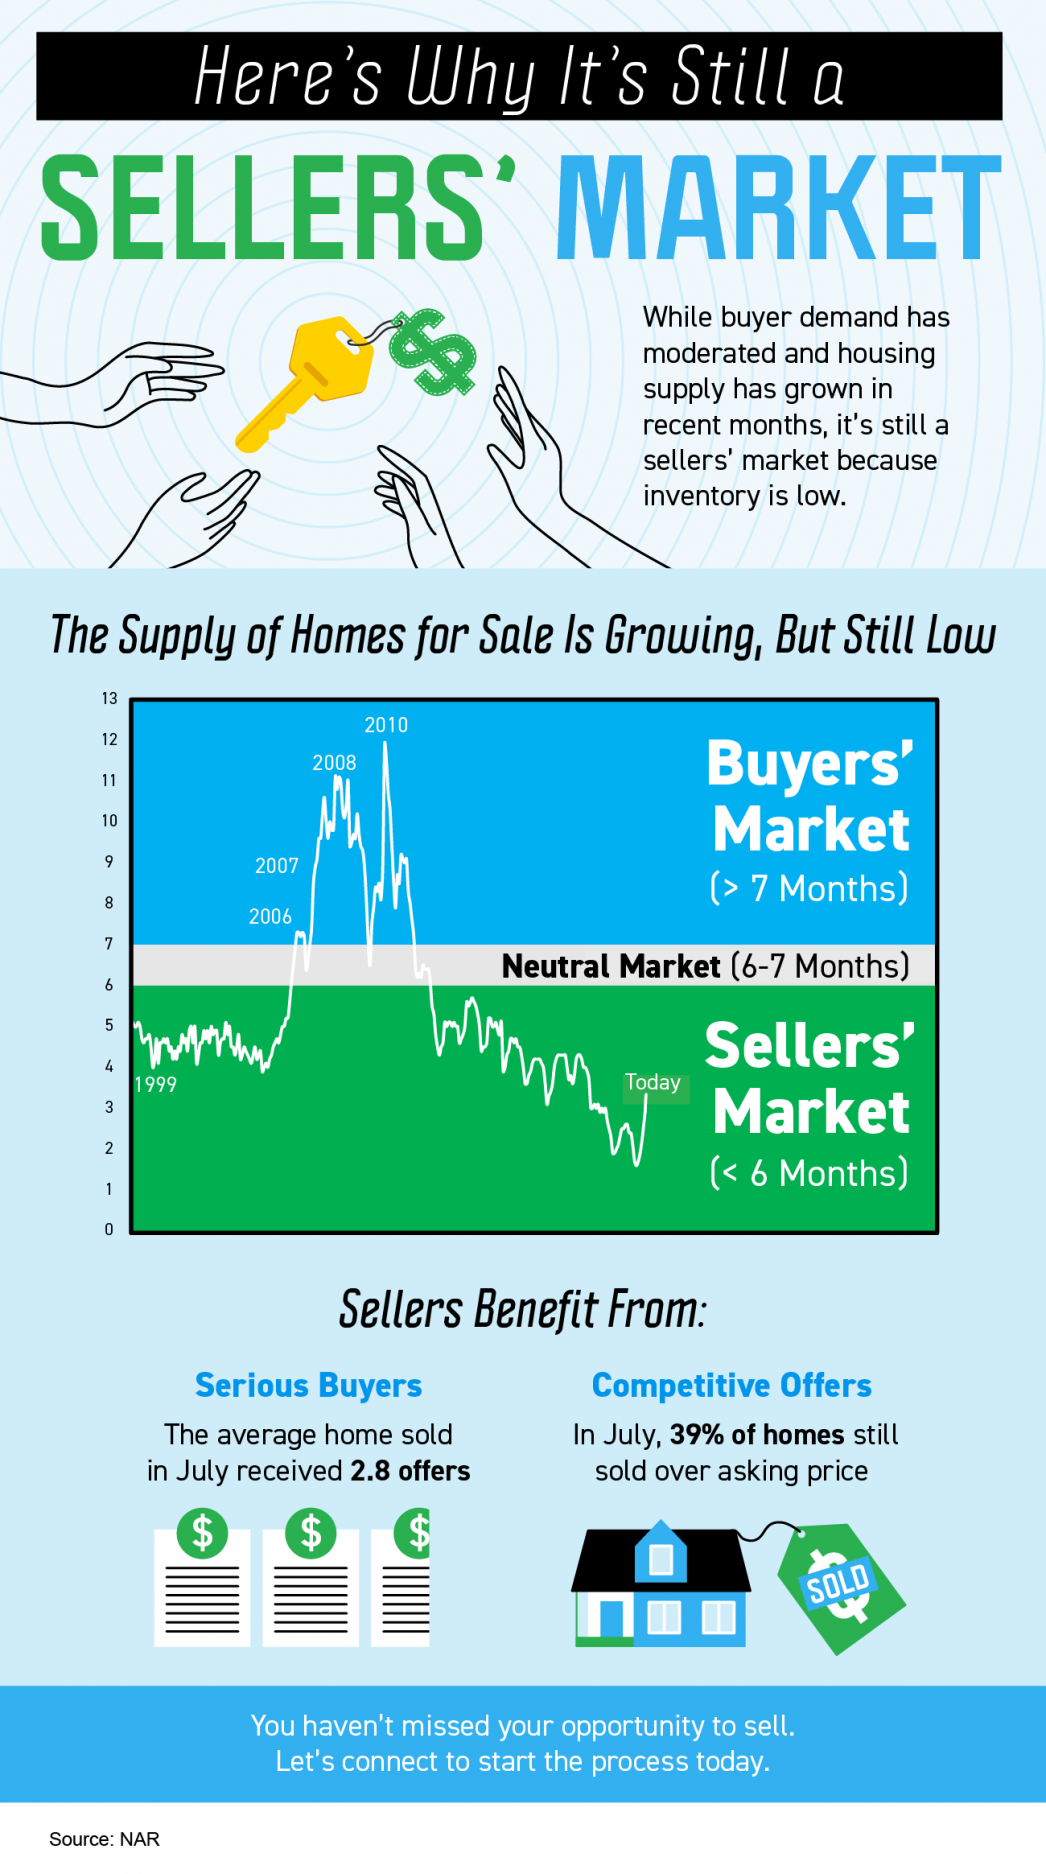 Here's Why It's Still a Sellers' Market - INFOGRAPHIC - KM Realty Group LLC Chicago